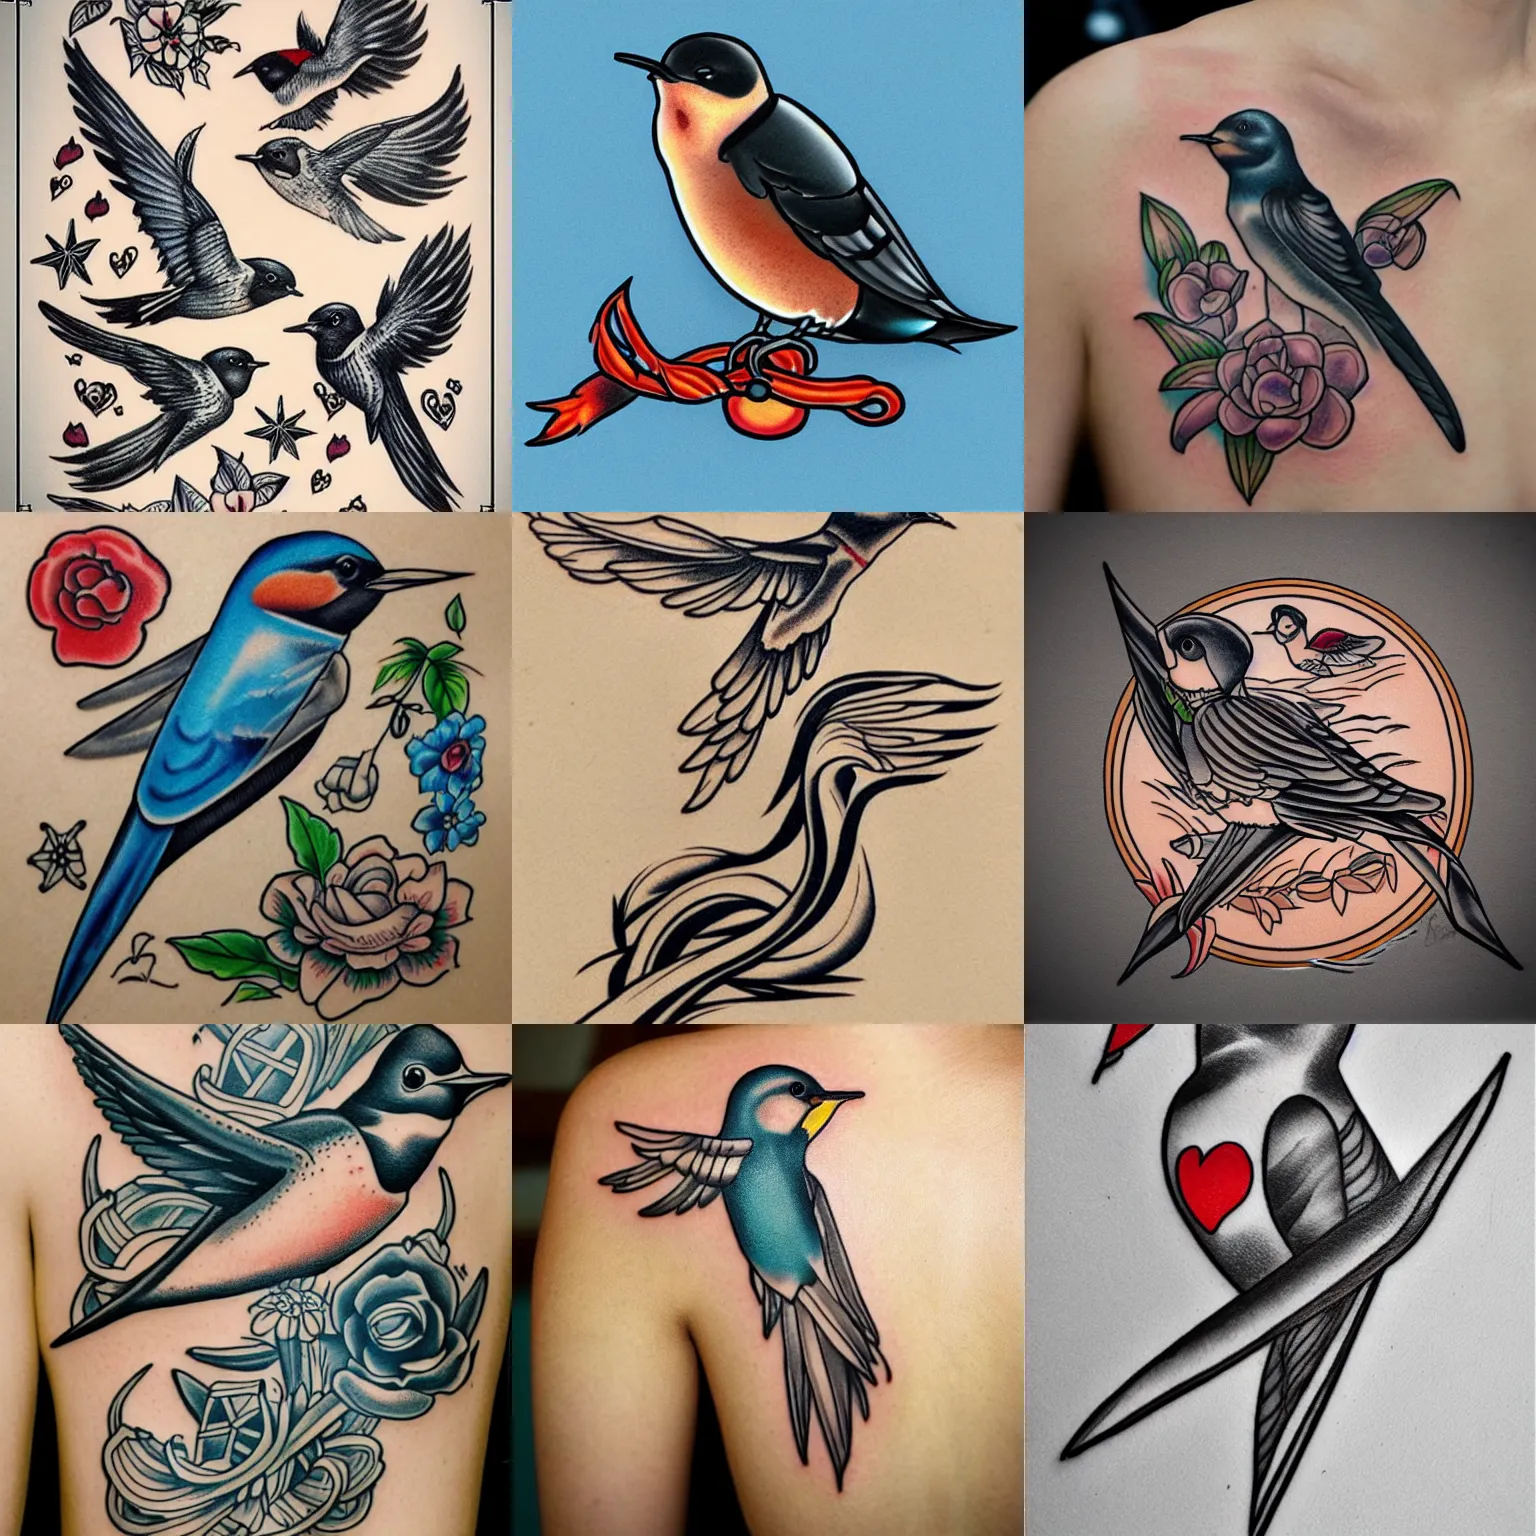 74 Inspiring Swallow Tattoos With Meaning - Our Mindful Life